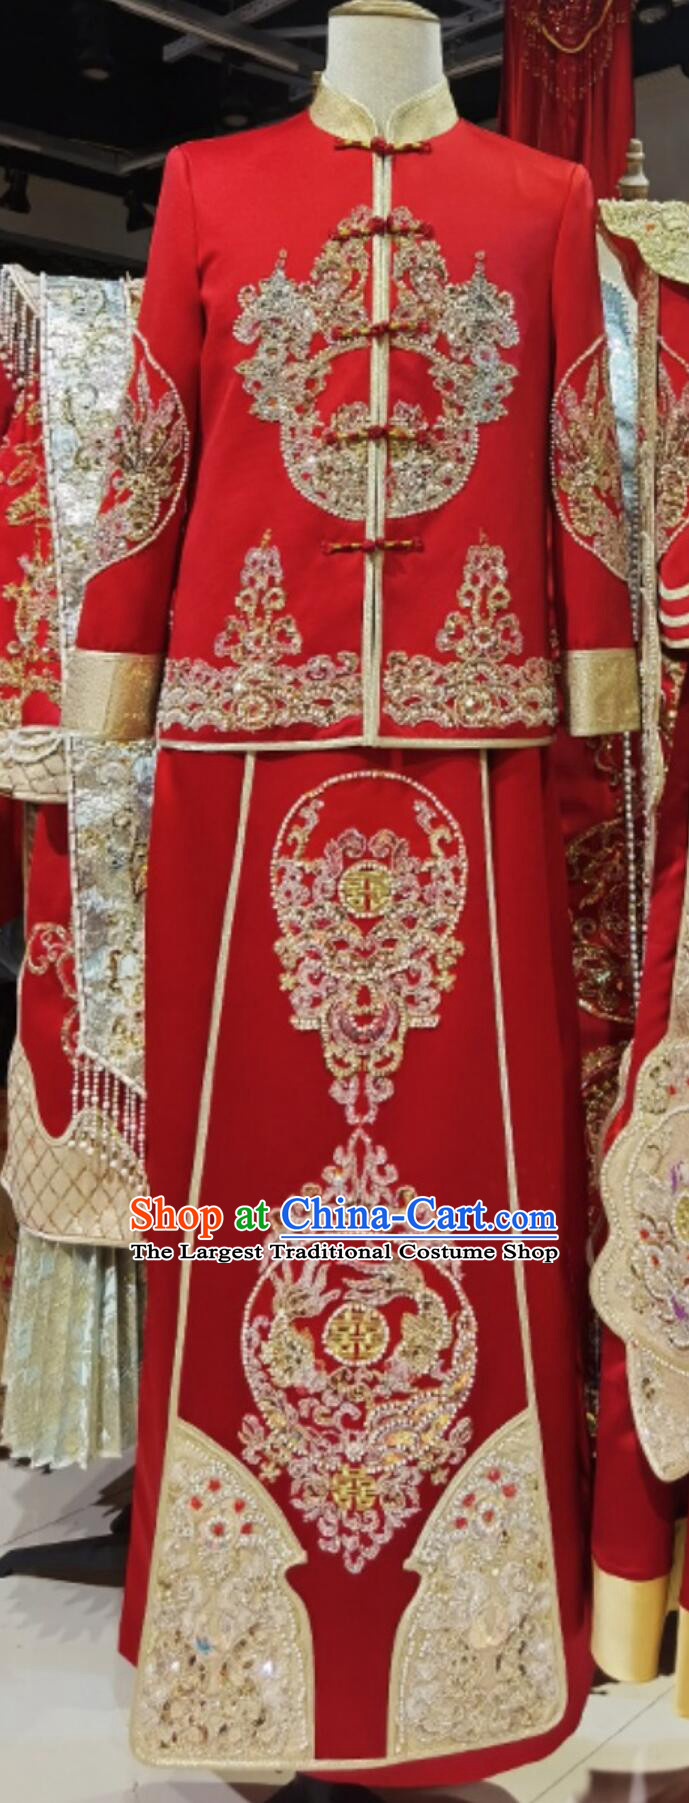 Chinese Tang Suit Embroidered Beads Mandarin Jacket and Long Robe Ancient Groom Clothing Traditional Wedding Male Outfit